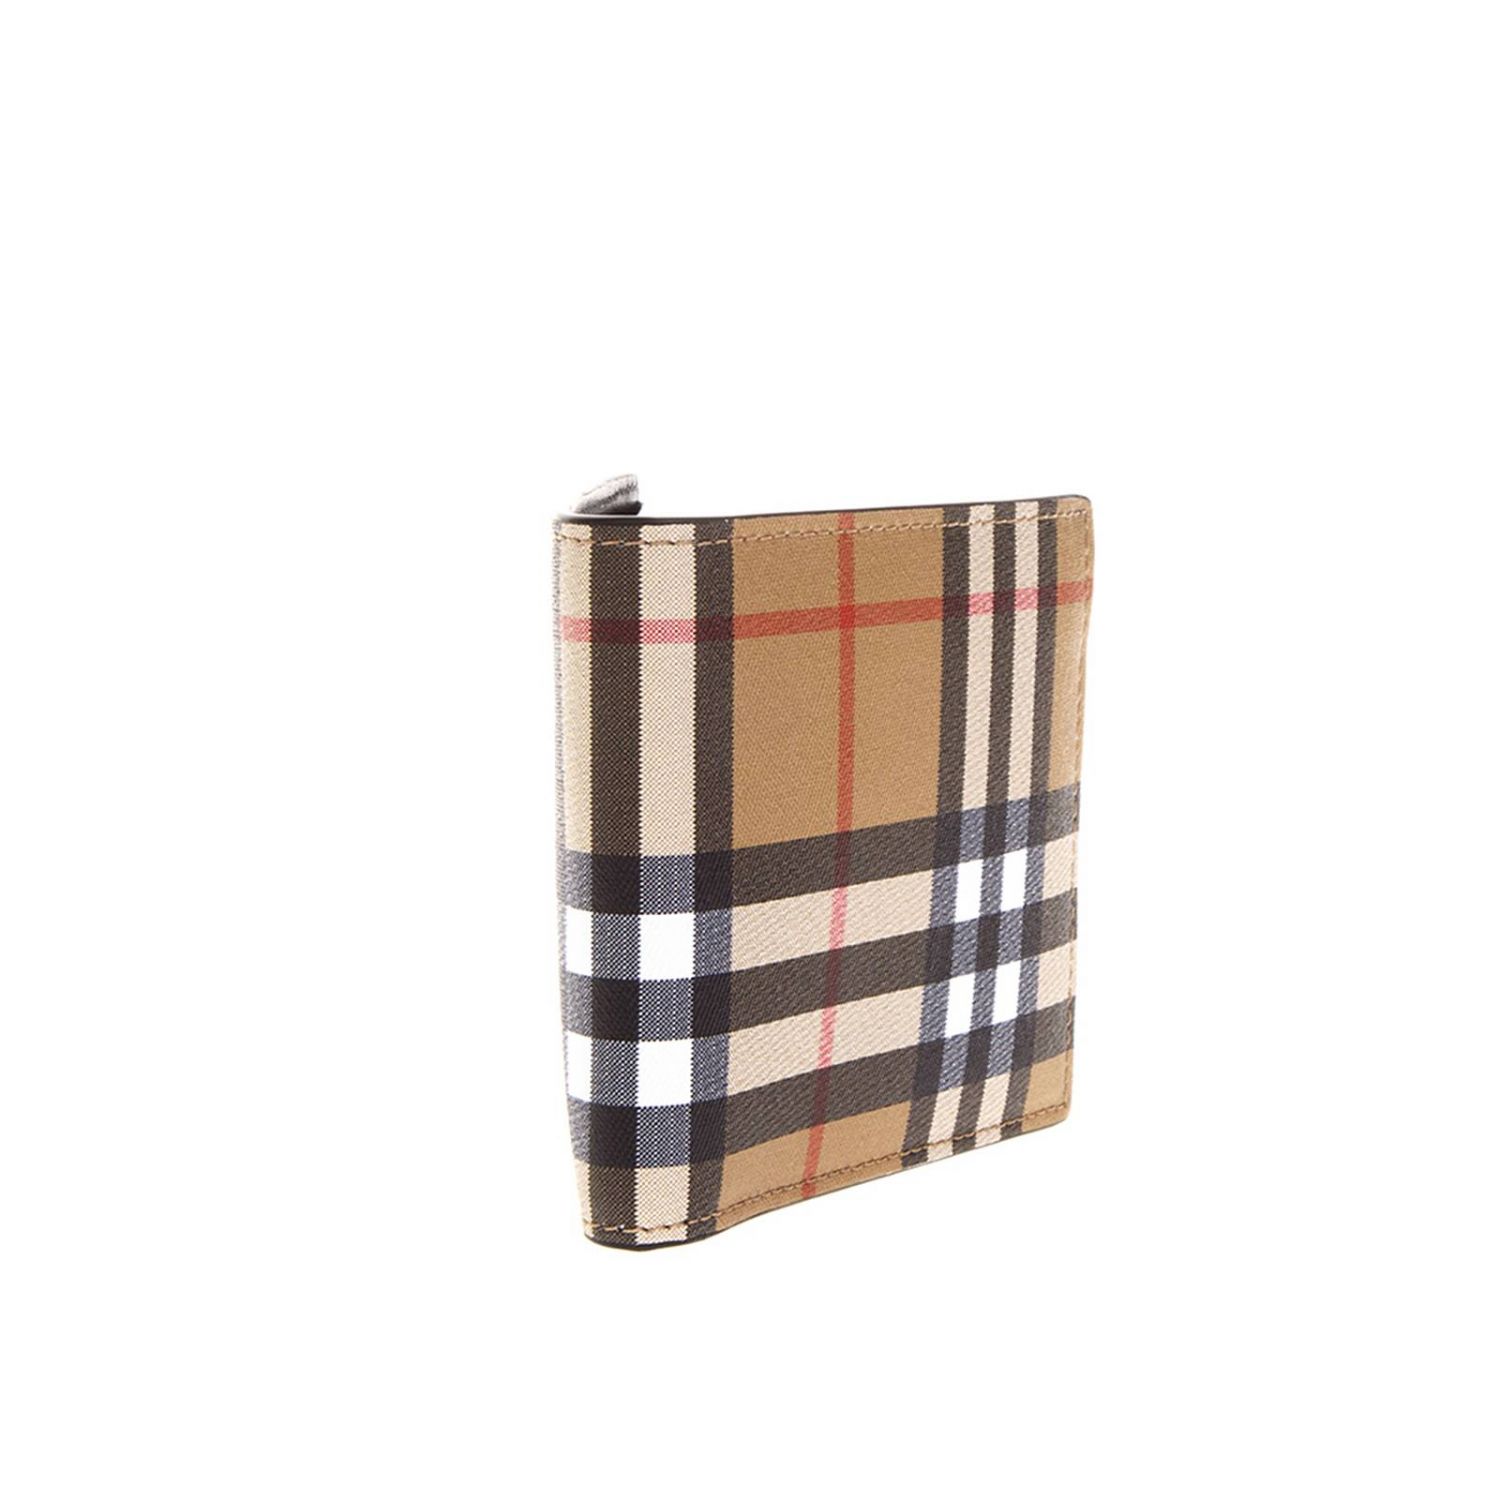 Burberry Outlet: Wallet women - Beige | Wallet Burberry 4074037 GIGLIO.COM